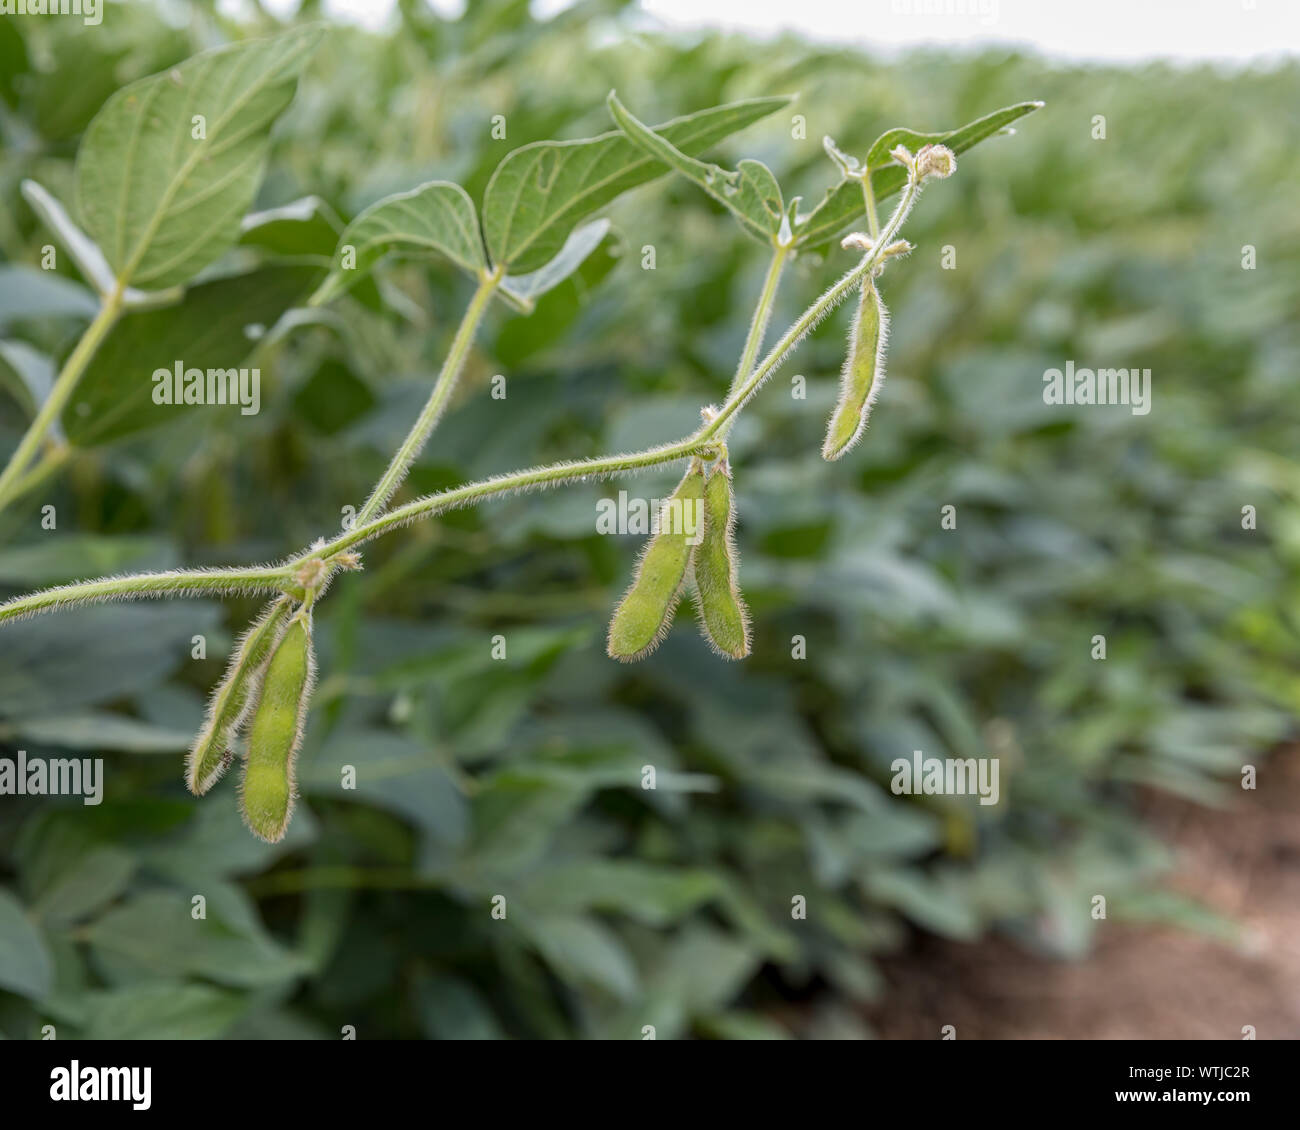 Closeup of bean pods on soybean plant at R6 growth stage in farm field Stock Photo